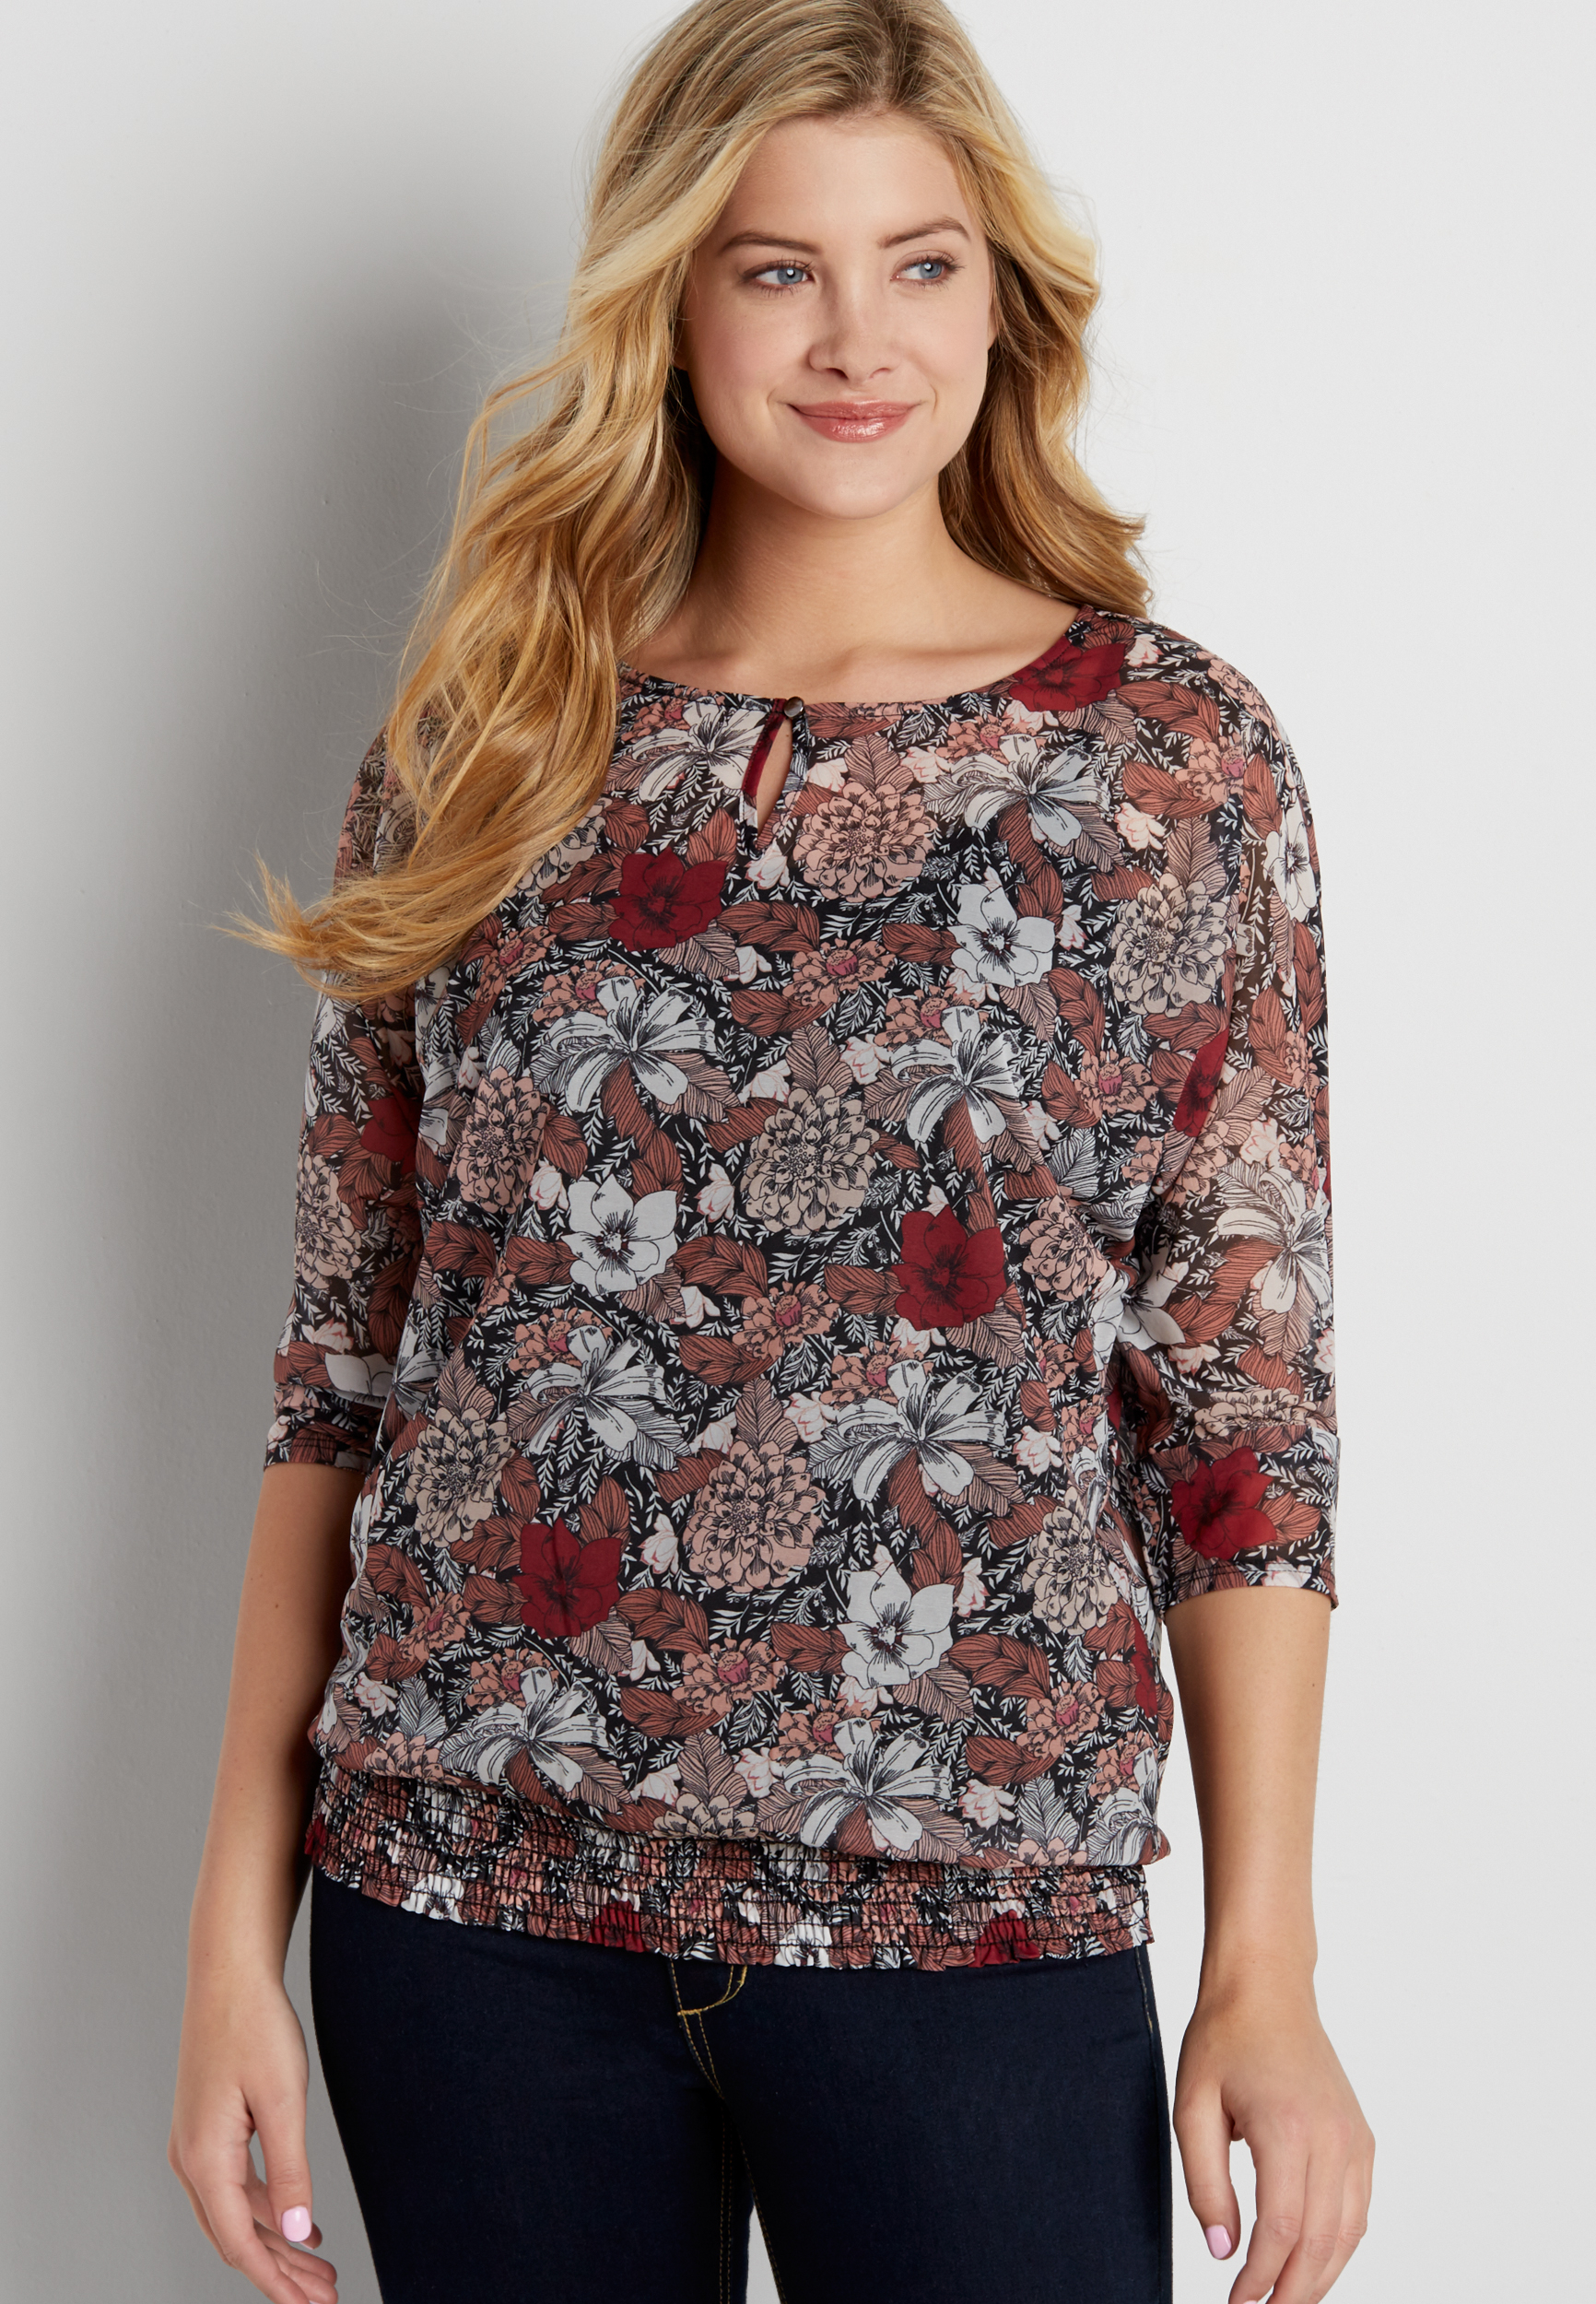 dolman top with smocked bottom hem in floral print | maurices